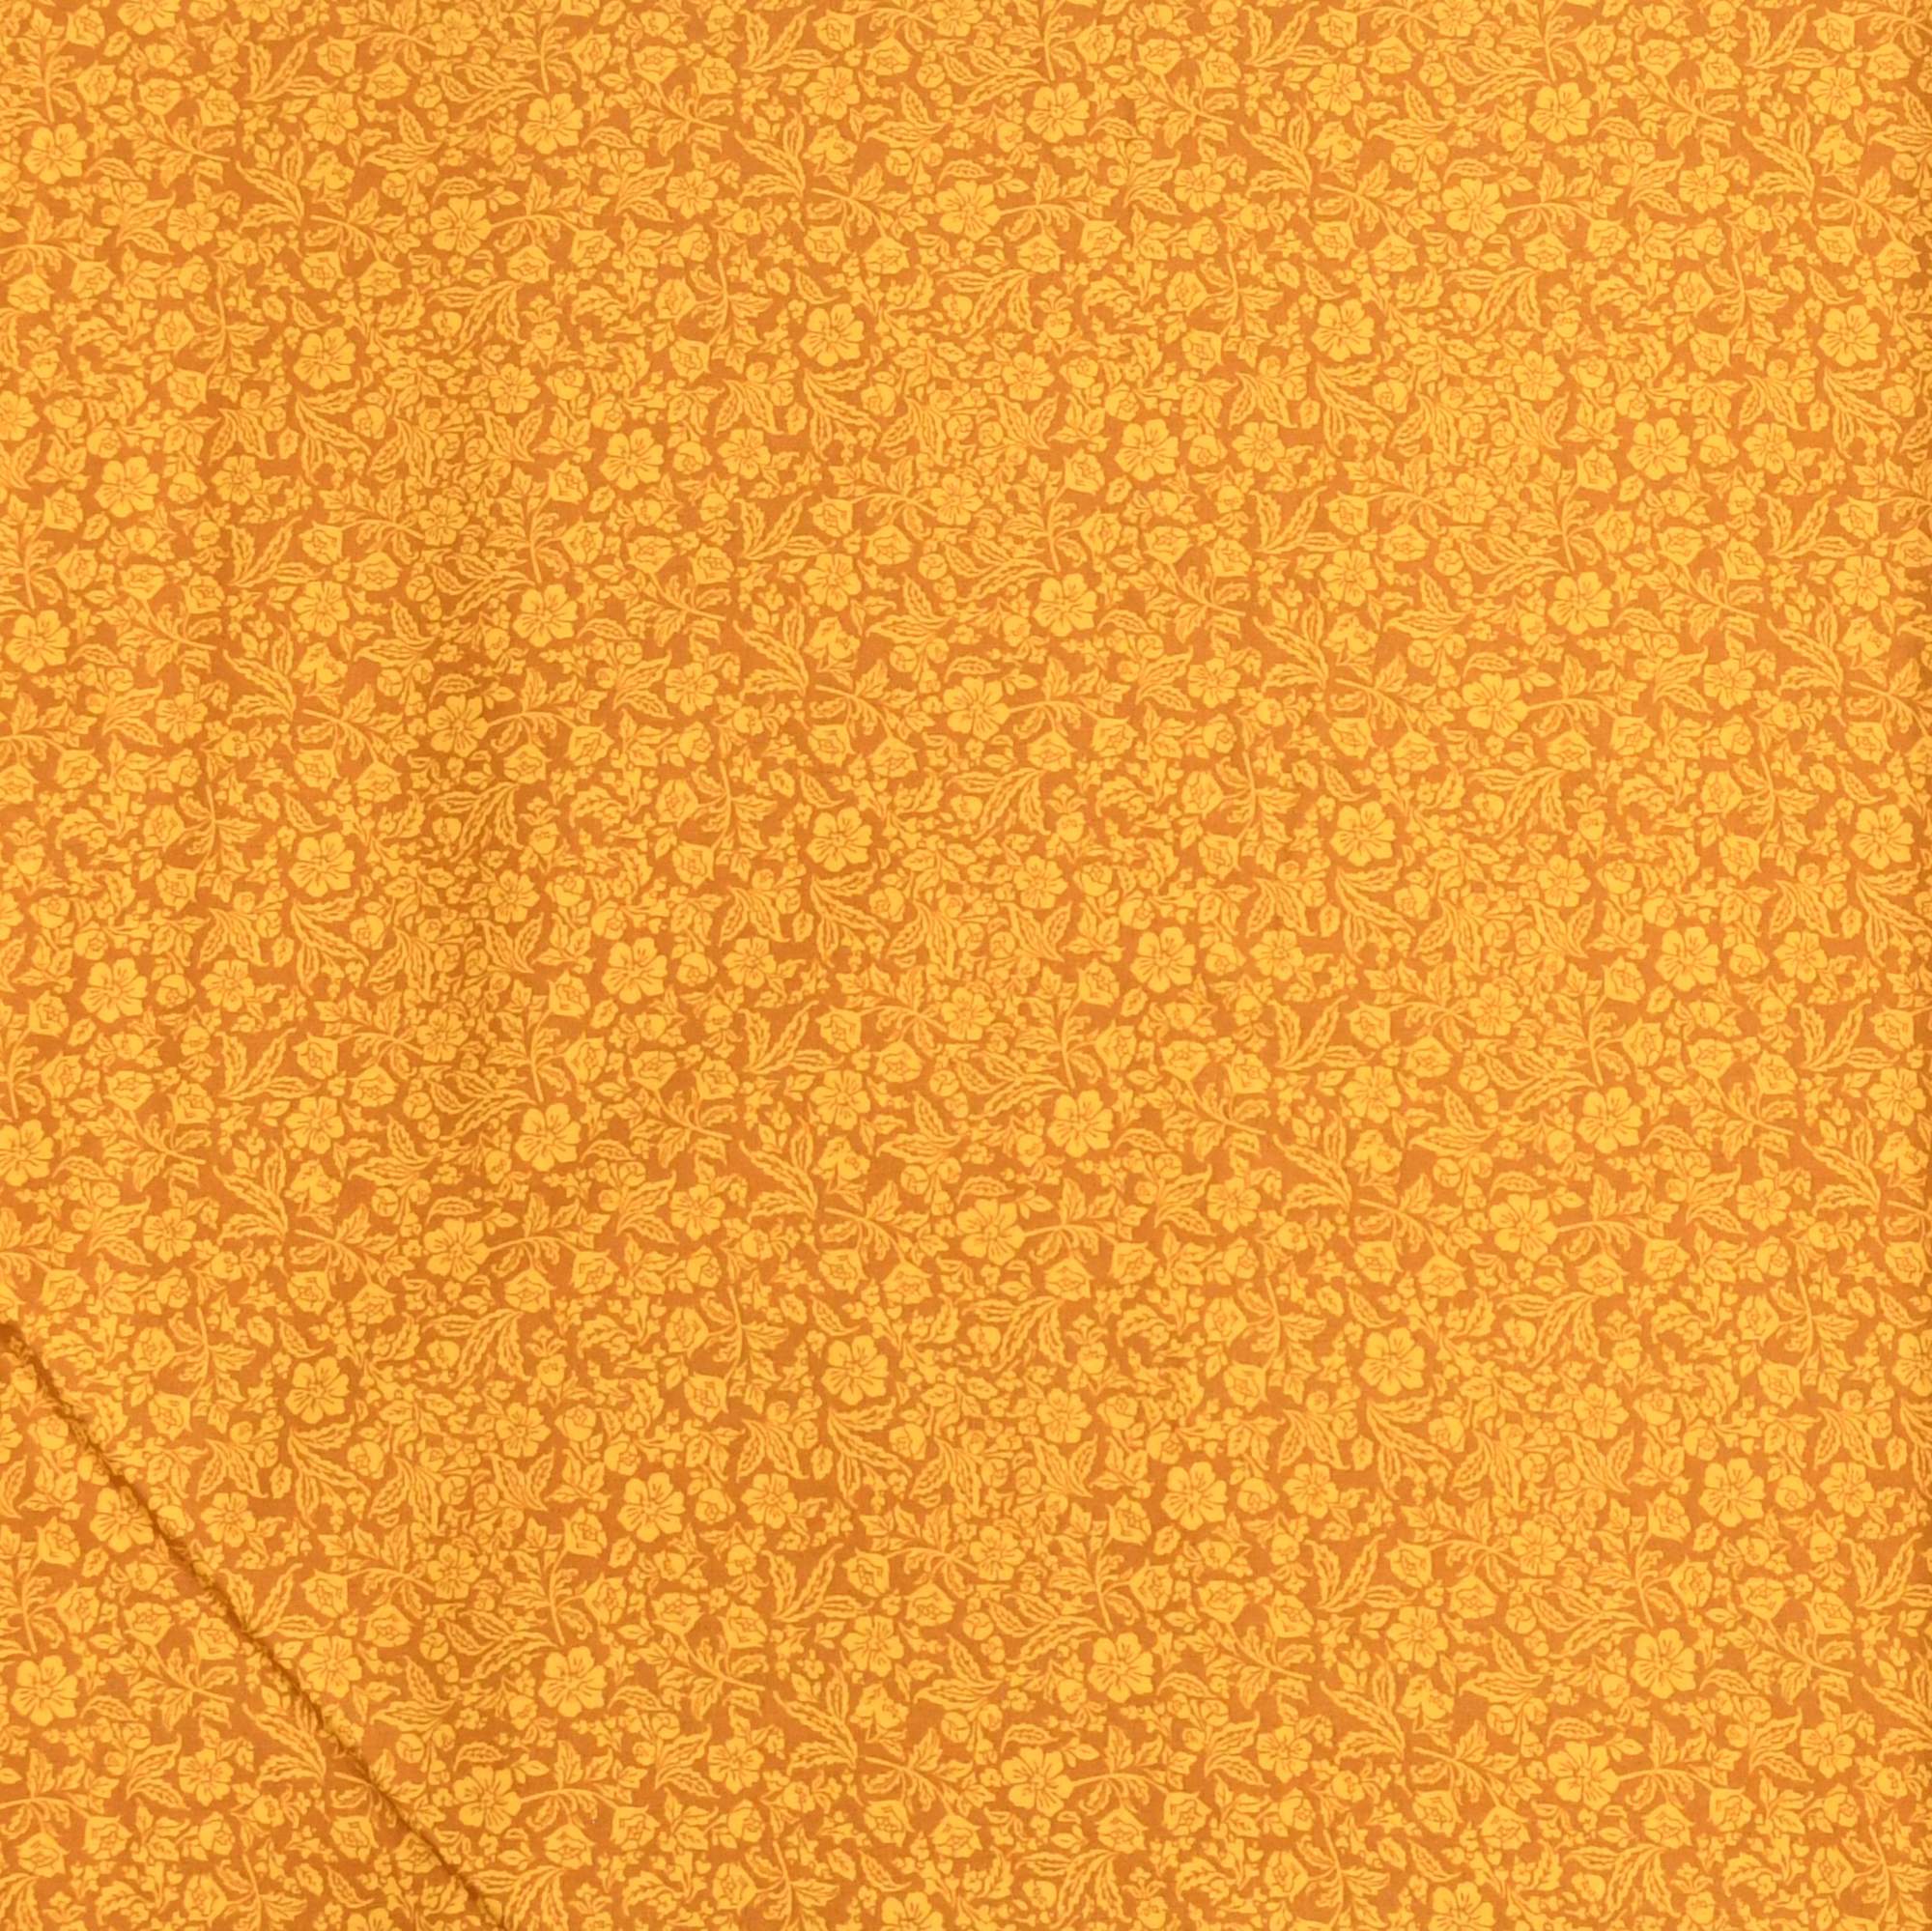 Waverly Inspirations 44" Cotton Paris Floral Fabric by the Yard, Marigold - image 1 of 2